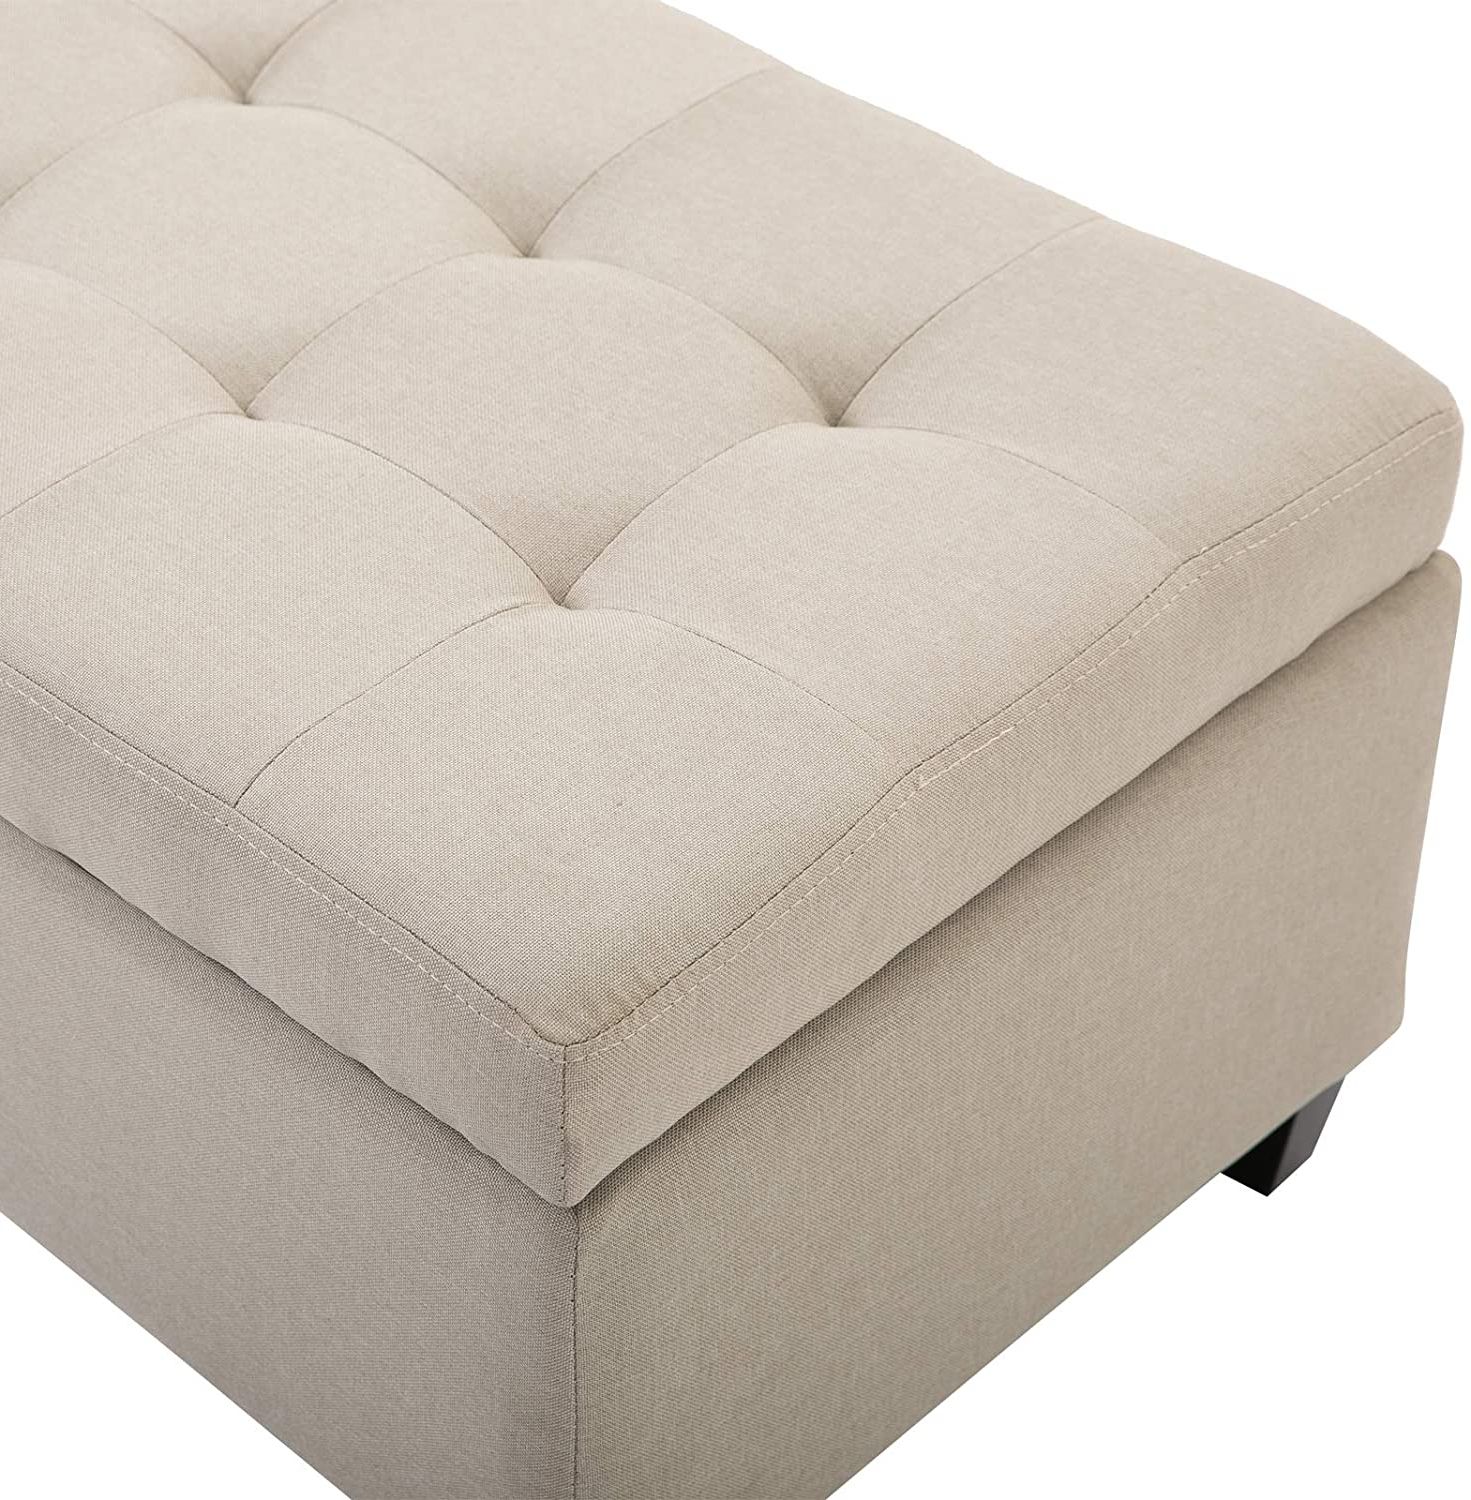 51" Large Tufted Linen Fabric Ottoman Storage Bench With Soft Close Top Intended For Favorite Cream Fabric Tufted Oval Ottomans (View 3 of 10)